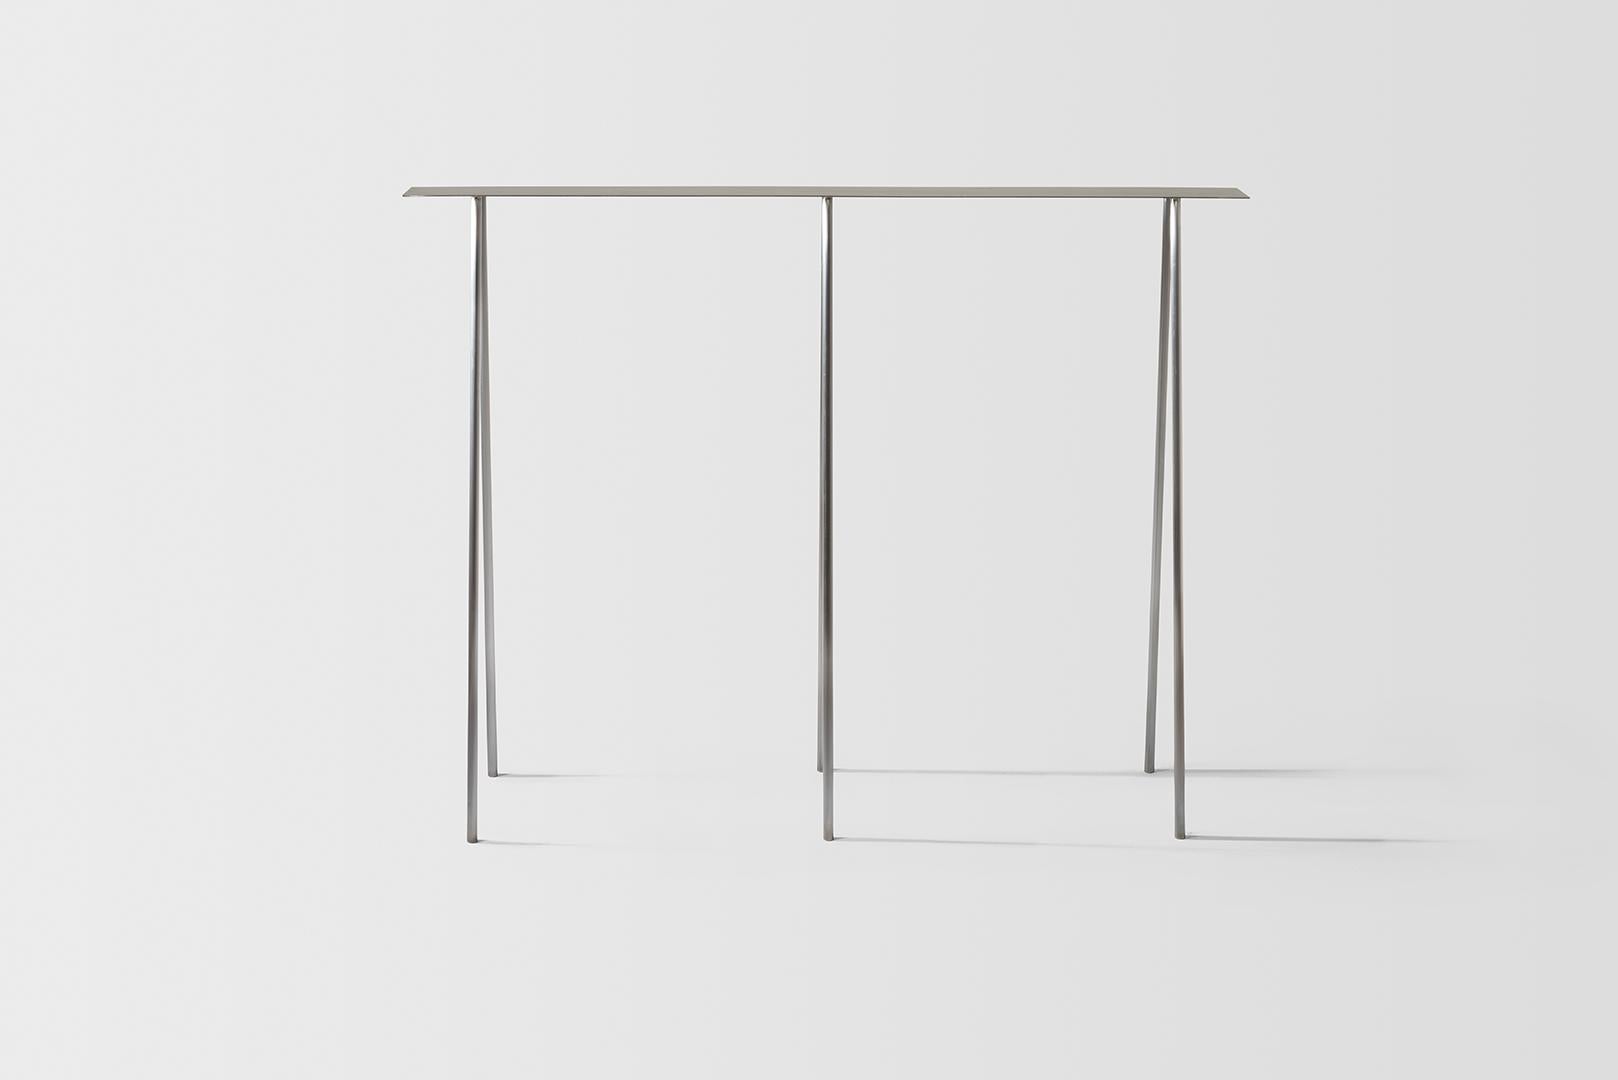 American Paper Table S, Console Table, in Polished Steel Finish by UMÉ Studio For Sale